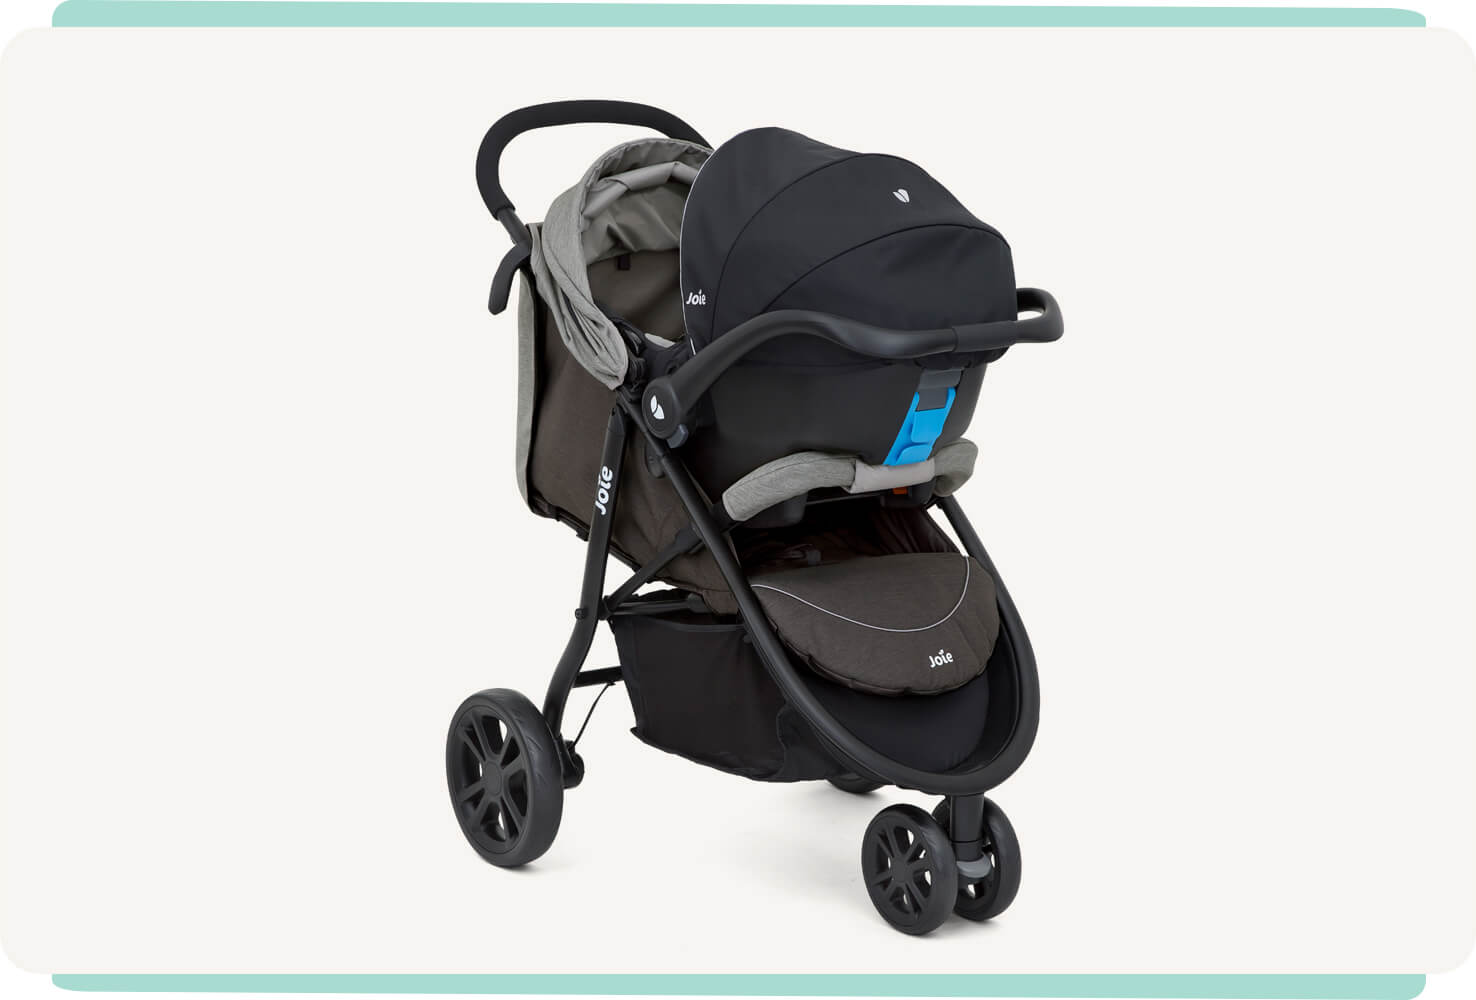   Joie litetrax 3 travel system in black with gemm infant carrier at an angle.